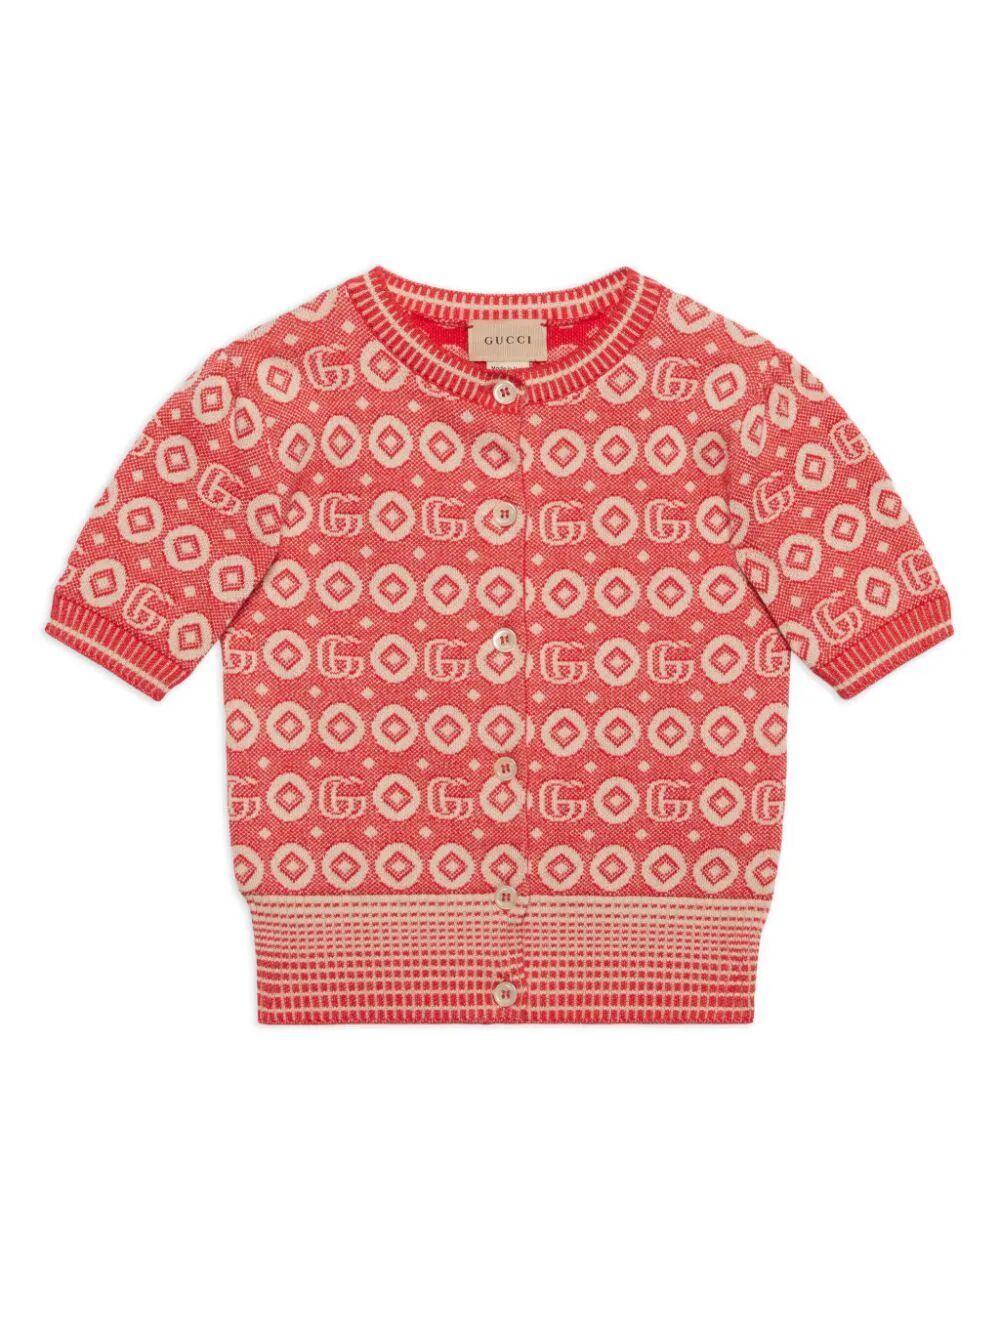 Gucci Babies' Cardigan Cotton Jaquard In Red